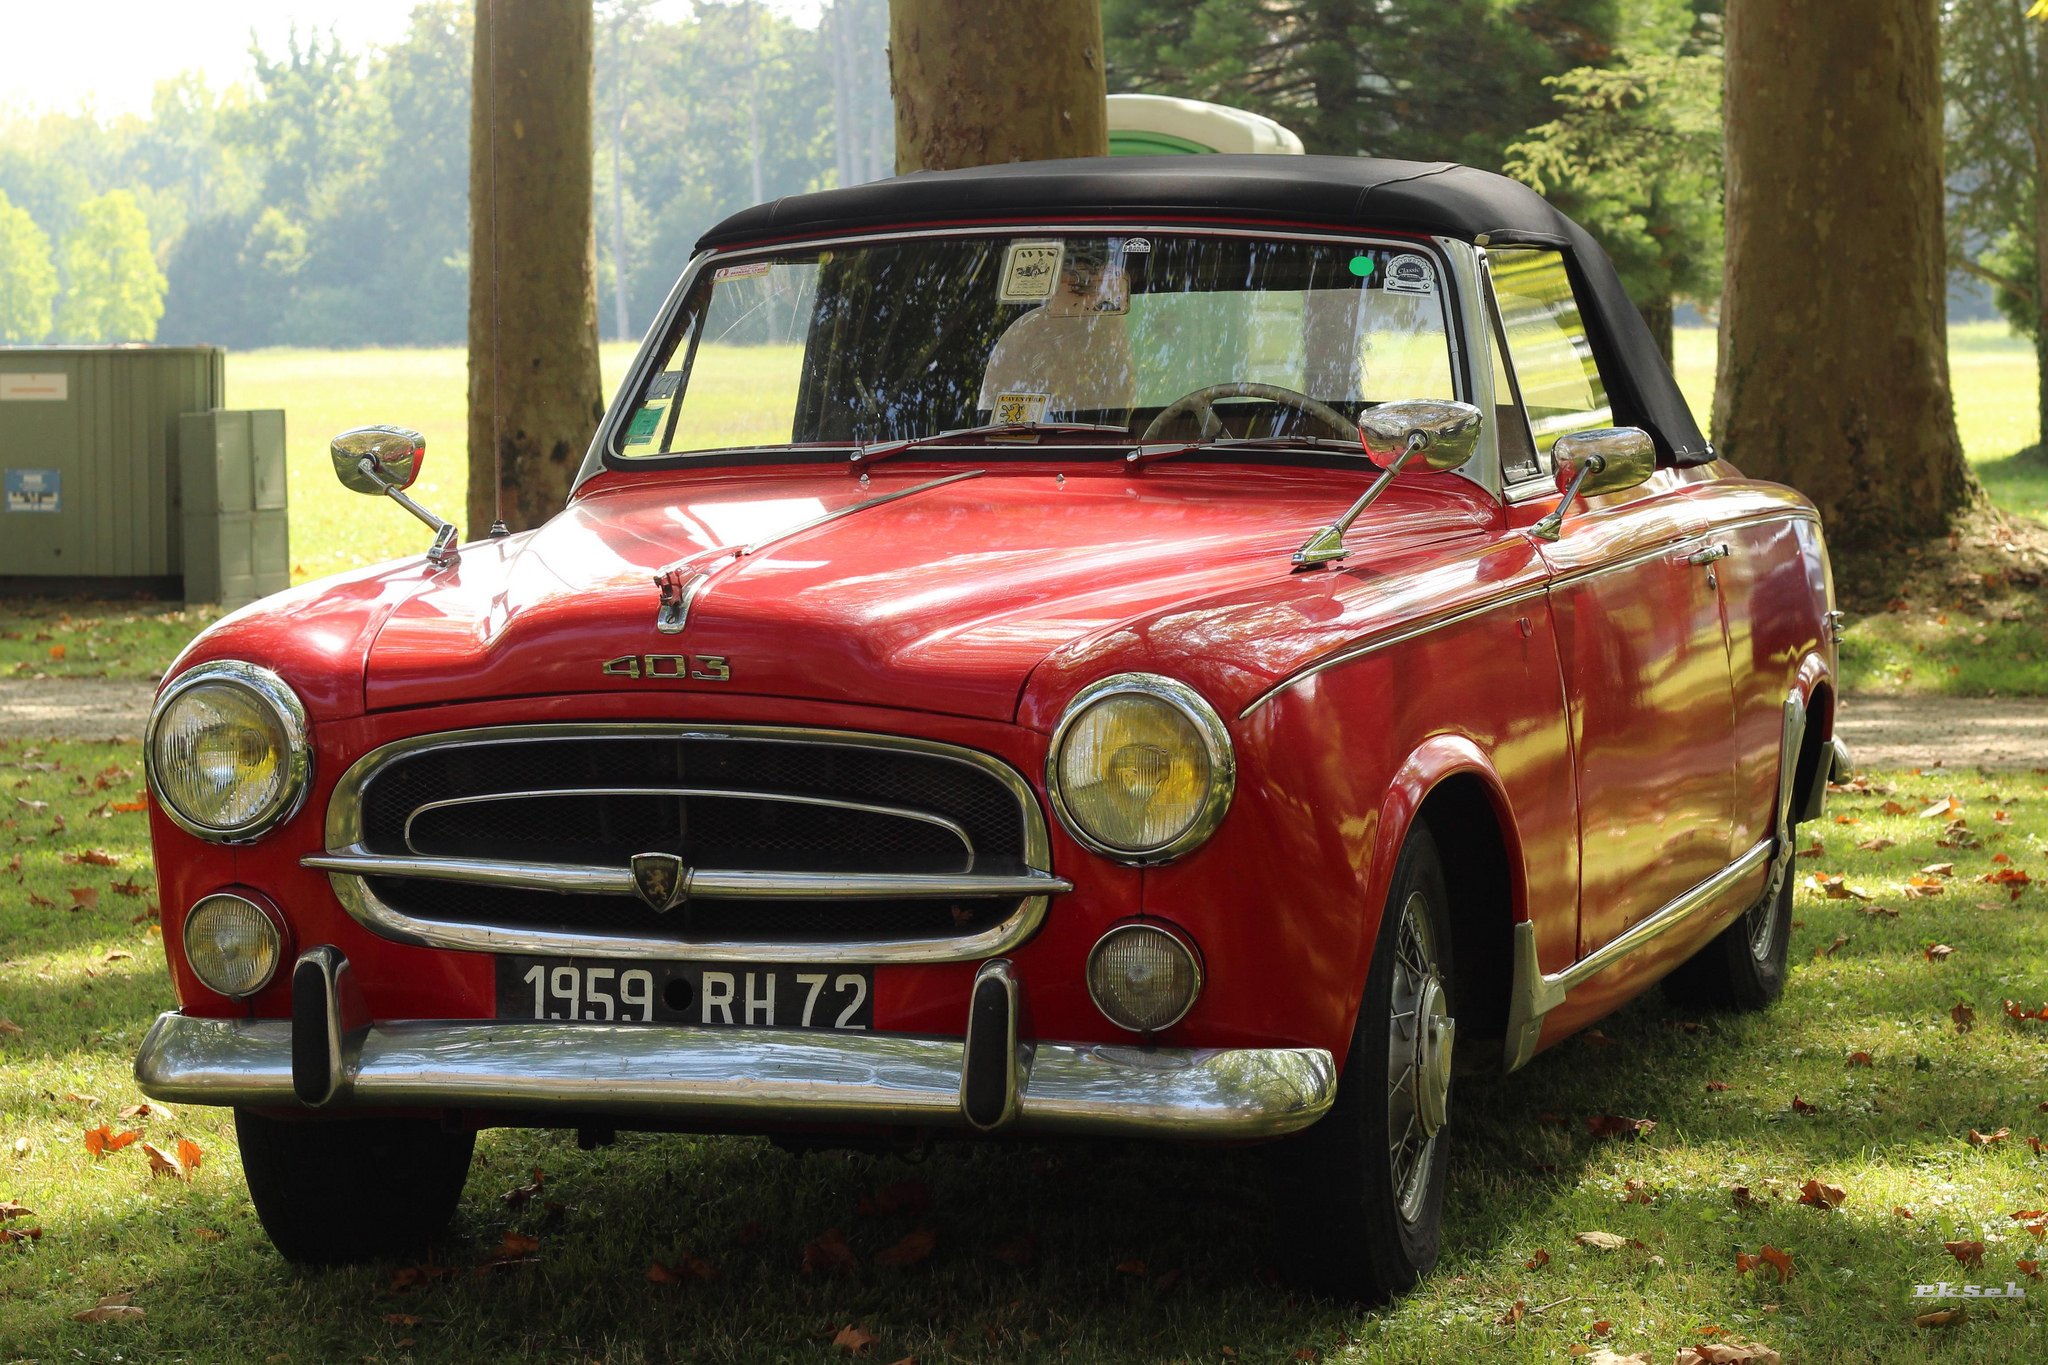 peugeot-403-classic-cars-french-convertible-cabriolet